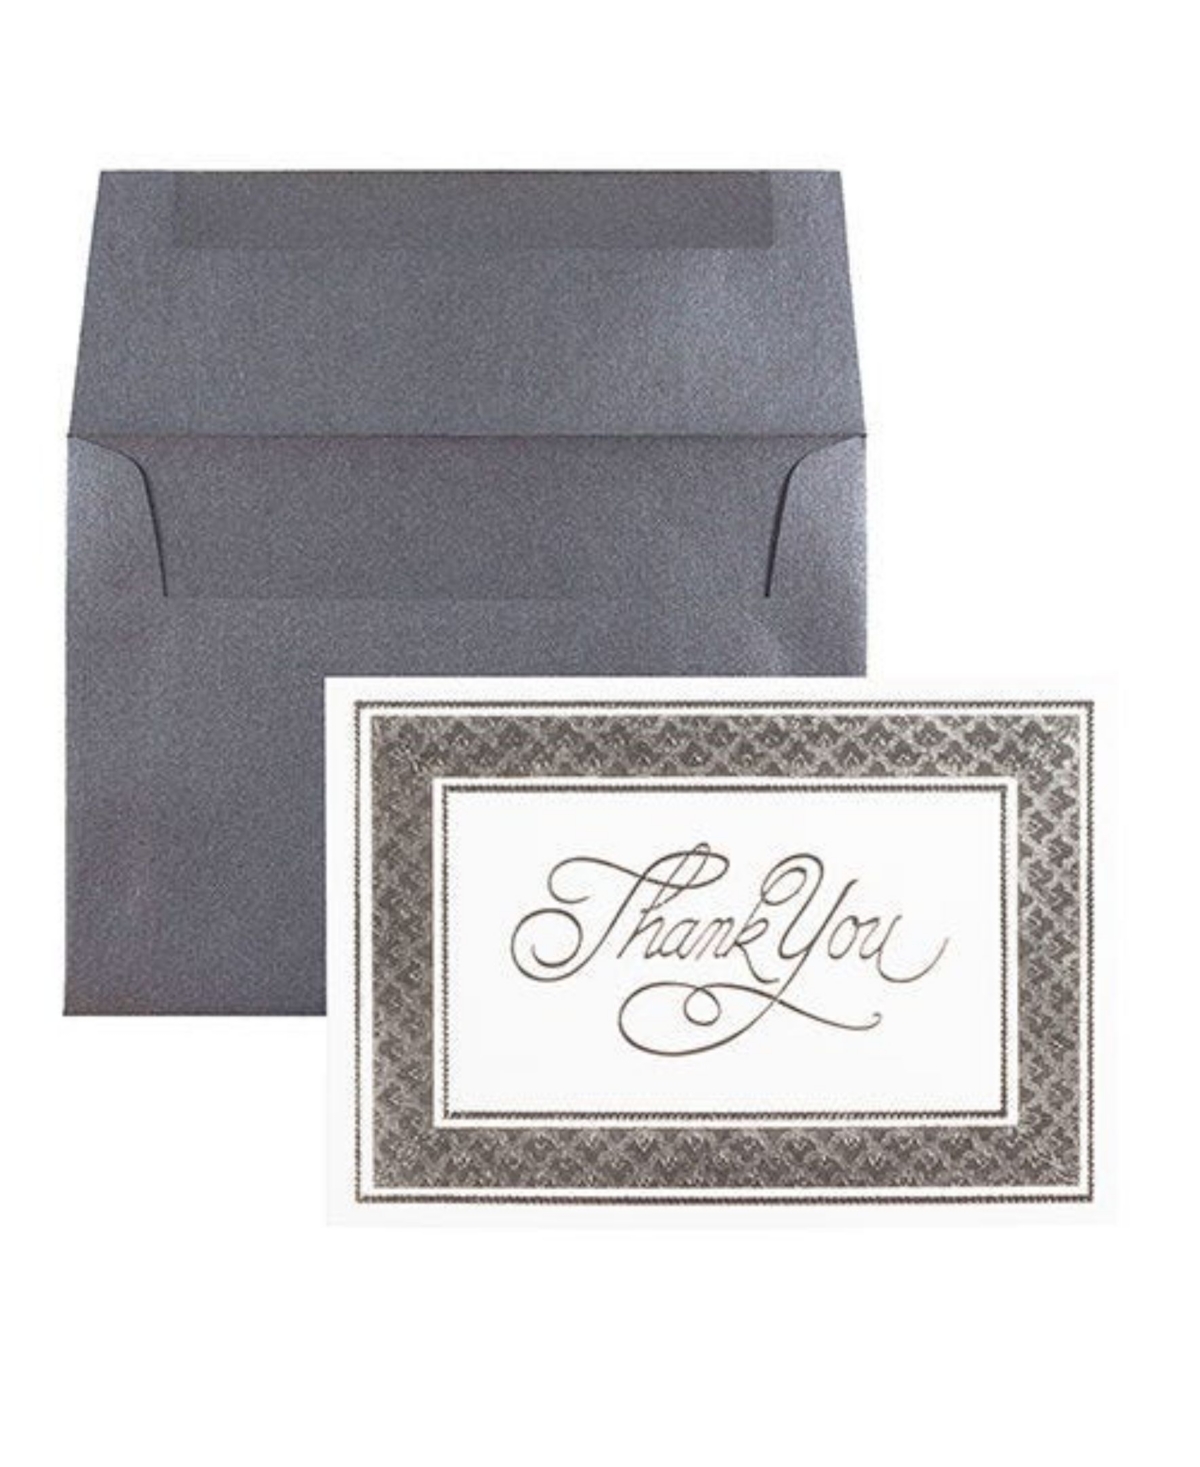 Jam Paper Thank You Card Sets In Silver Border Cards With Anthracite Enve